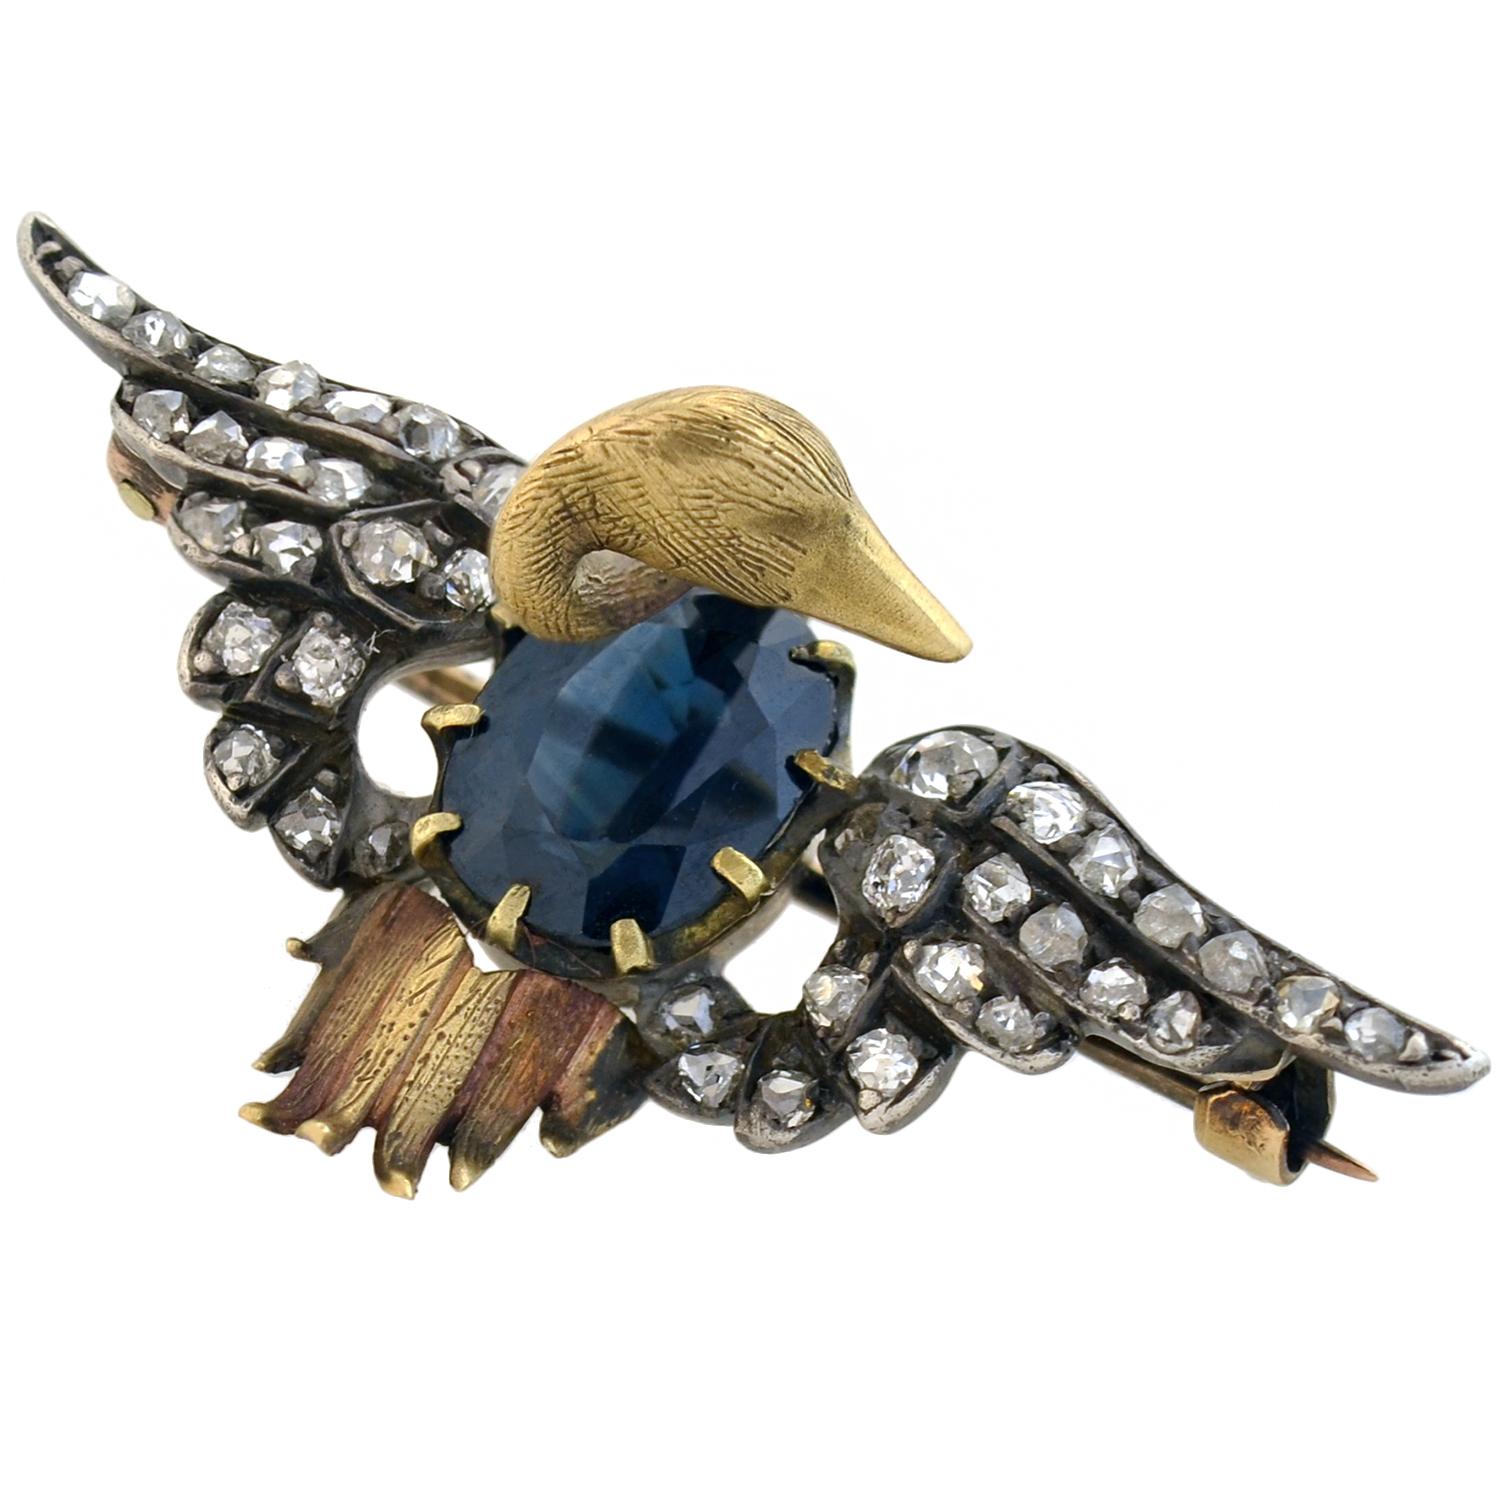 A magnificent sapphire and diamond swan pin from the Victorian (ca1880) era! Crafted in sterling silver topped 15kt yellow gold, this lovely piece features a three-dimensional swan with a beautiful and unusual design. At the center is the swan's